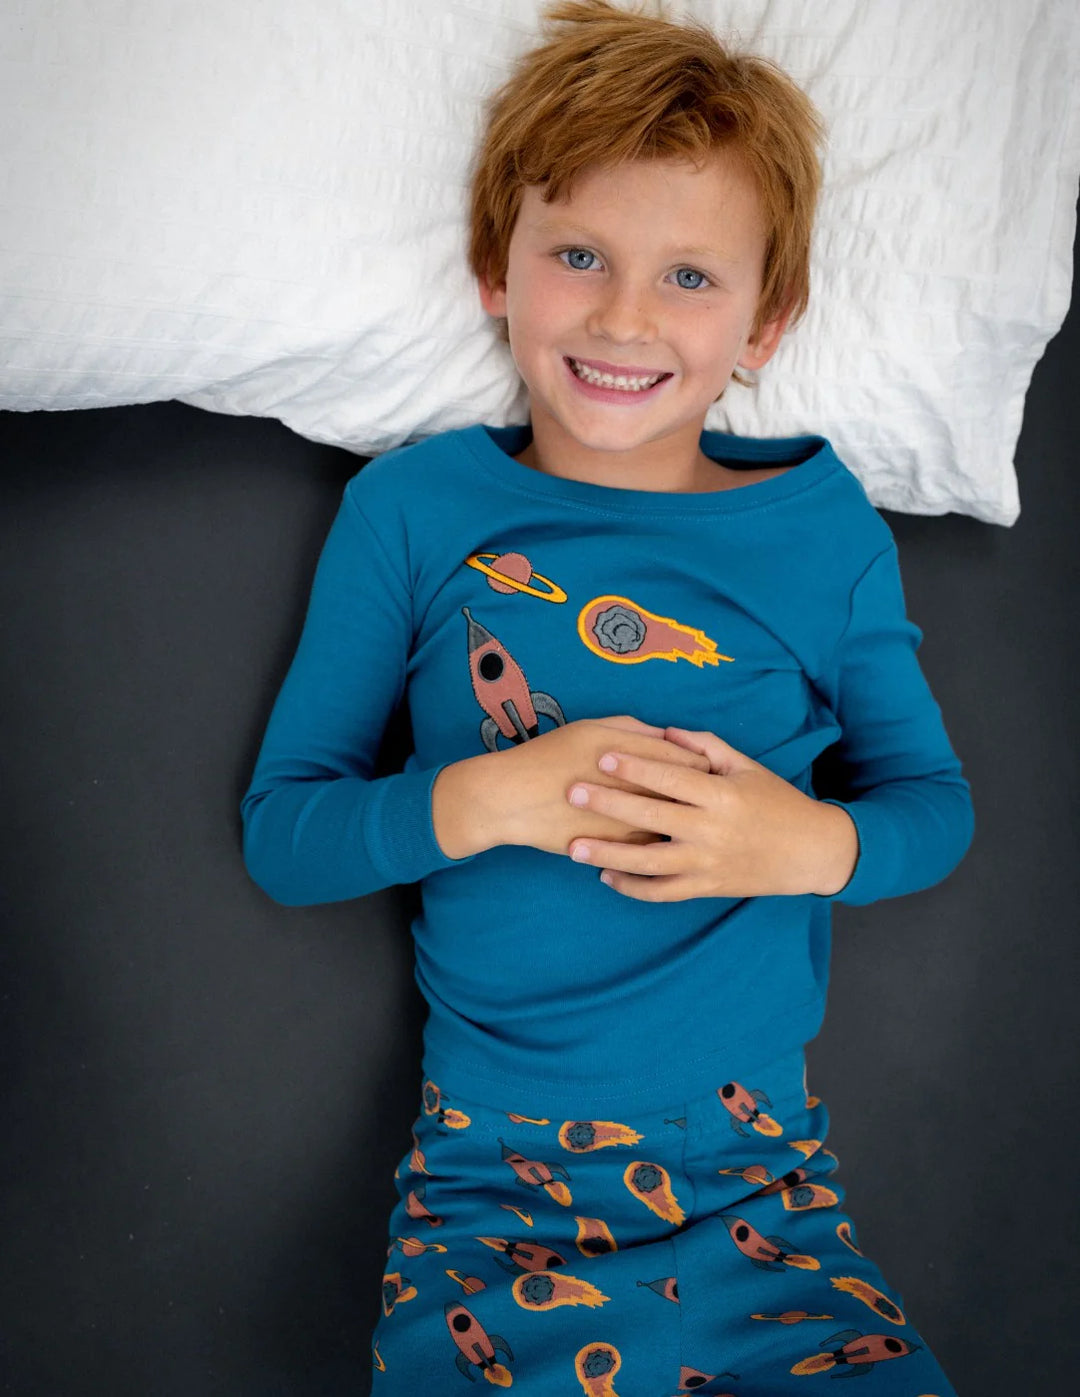 Why Do Kids Need to Wear Pajamas to Bed?